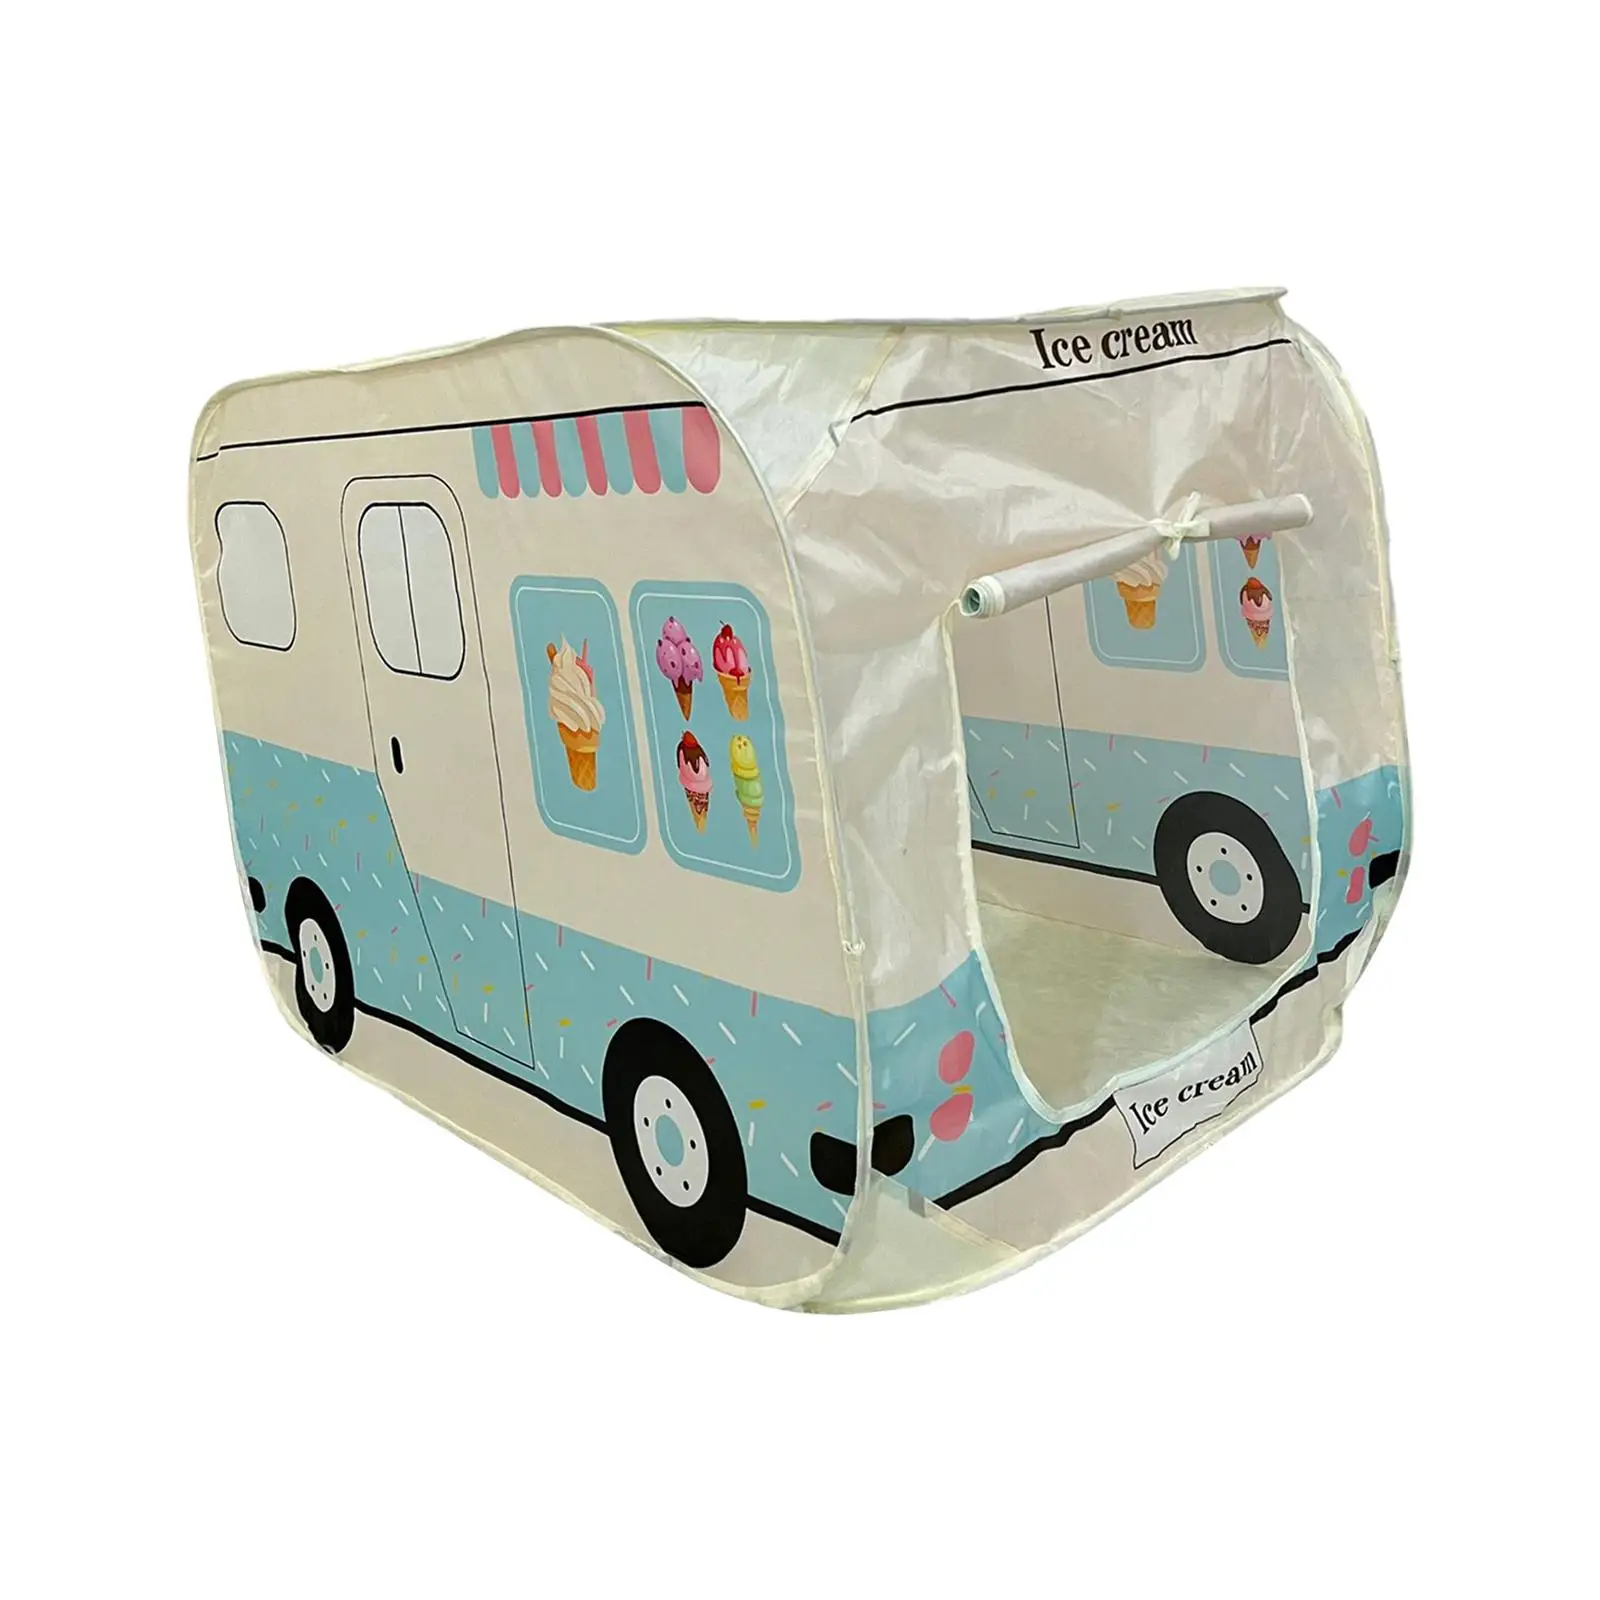 Ice Cream Truck Play Tent Foldable Child Room Decor Kids Play Tent for Kids